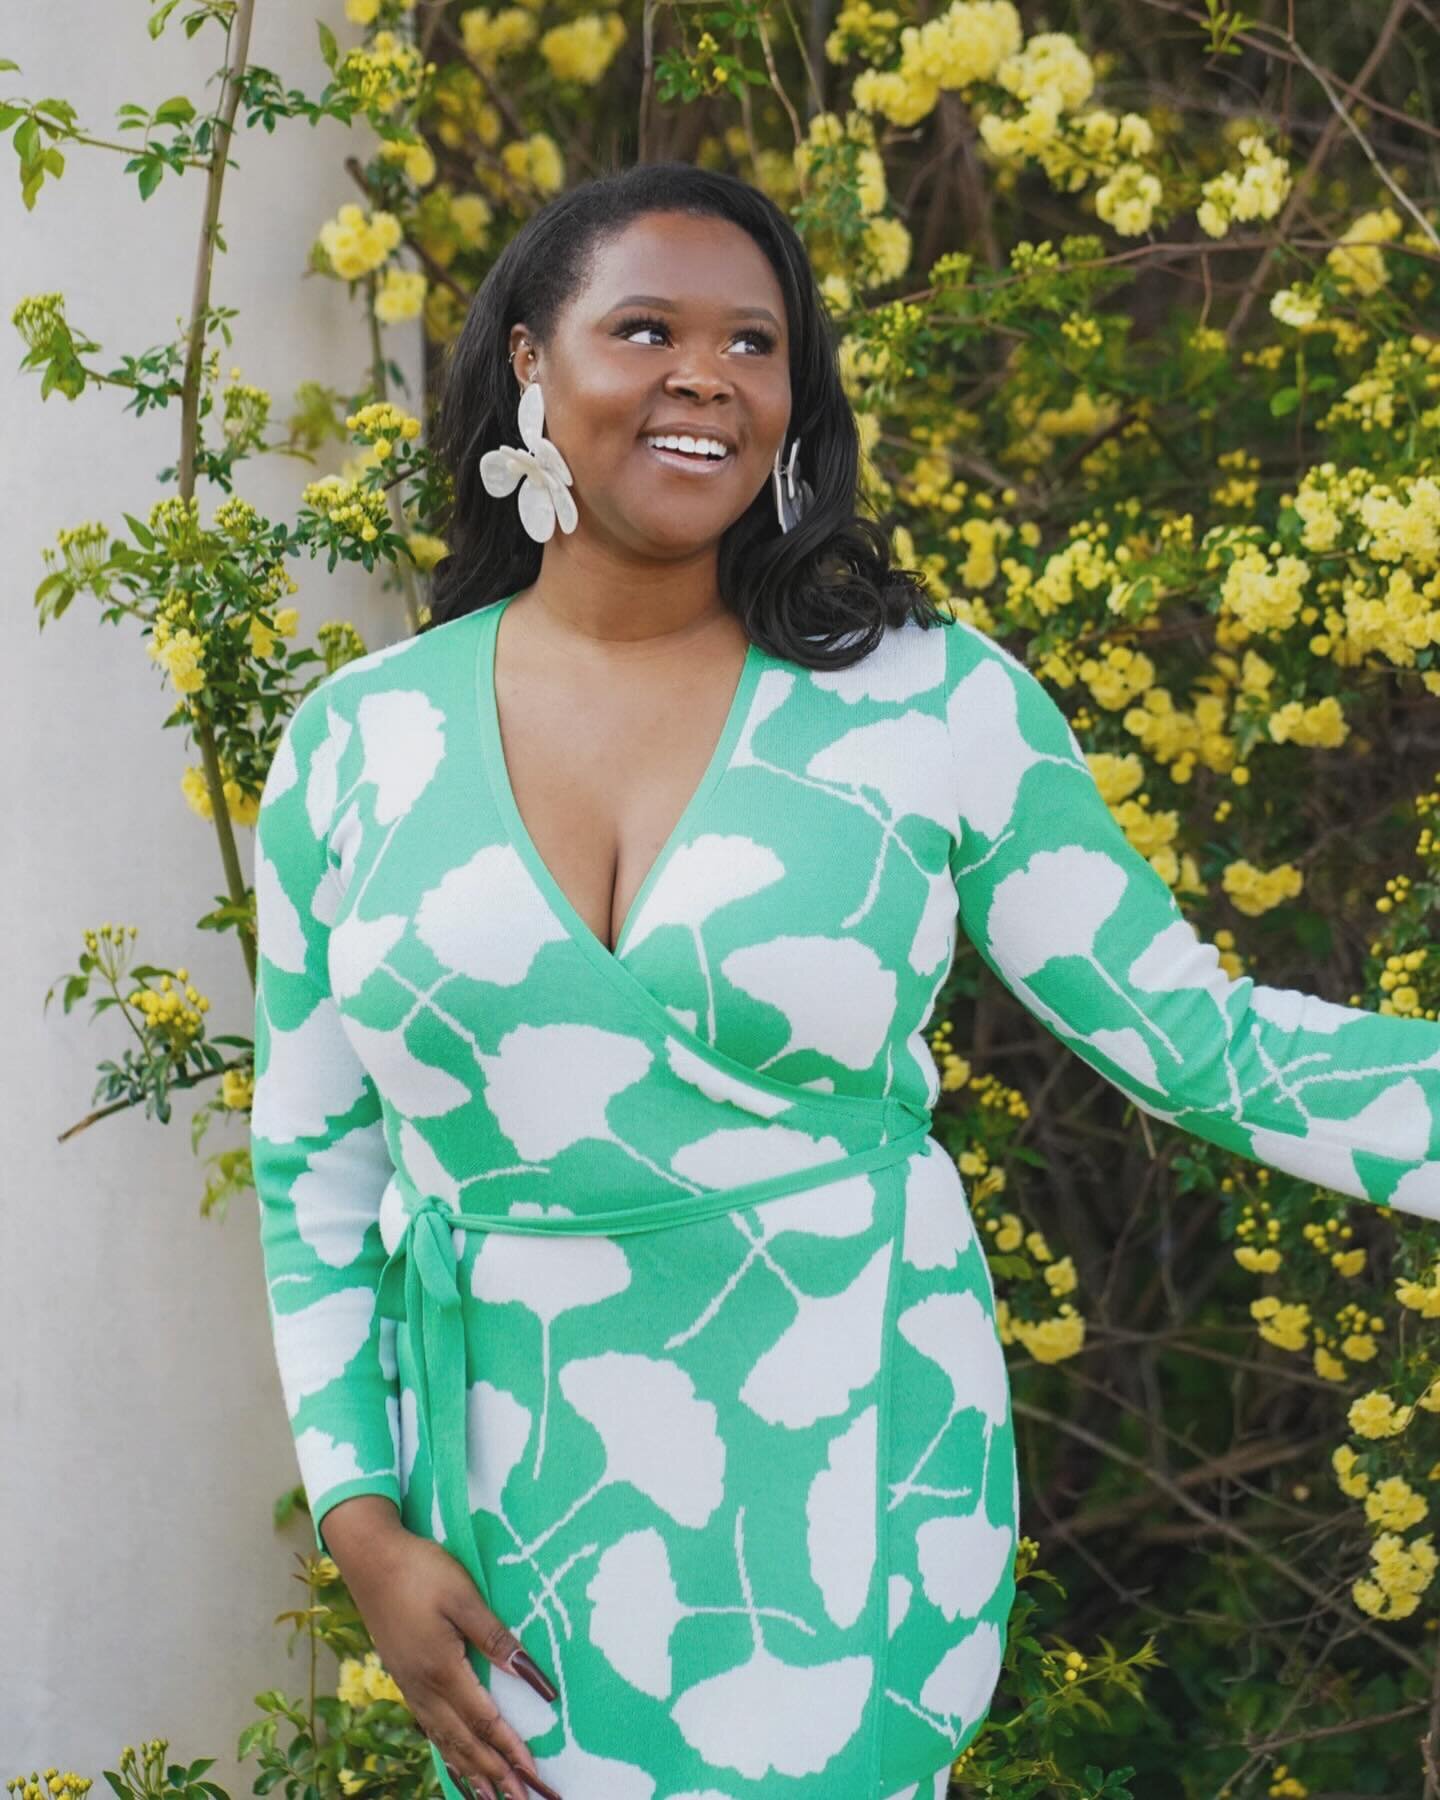 Happy Monday Peaches!

New blog post up on #thecreolepeach! Today I am showcasing the newest @target collaboration with @dvf, one of my favorite designers! Link in my bio for all the items I purchased and how I styled some of my favorite pieces!

#ta